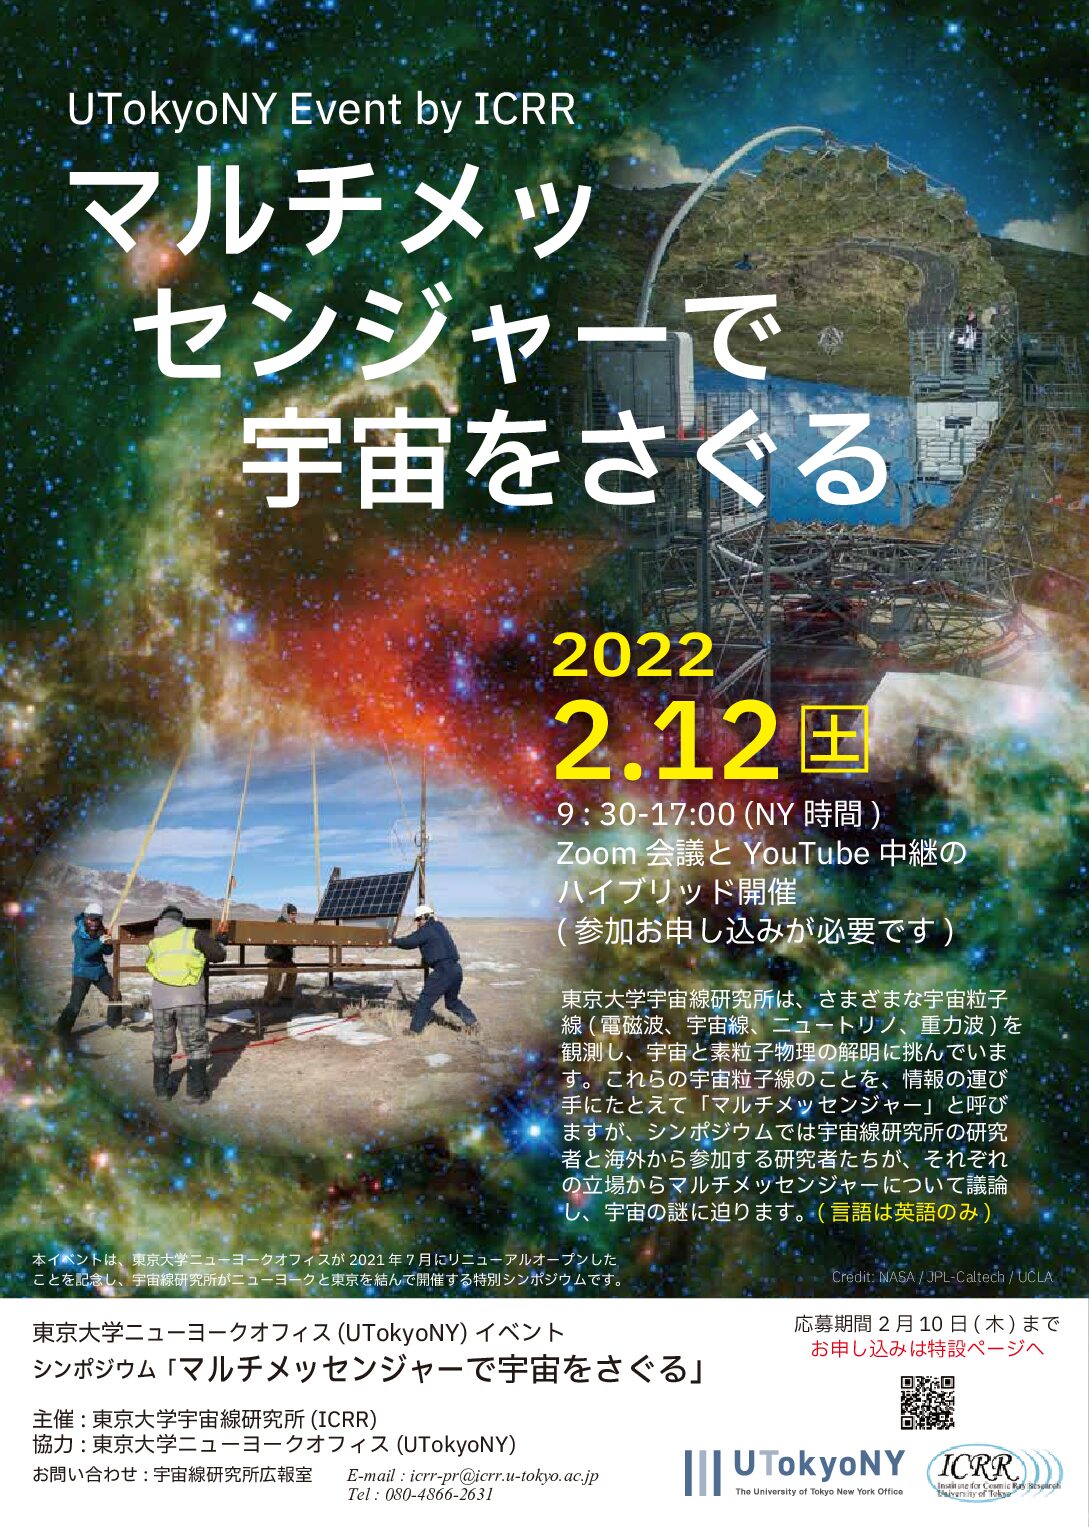 UTokyoNY Event　【February 12, 2022】Symposium “Exploring the Universe with Multi-Messengers”（by Online）